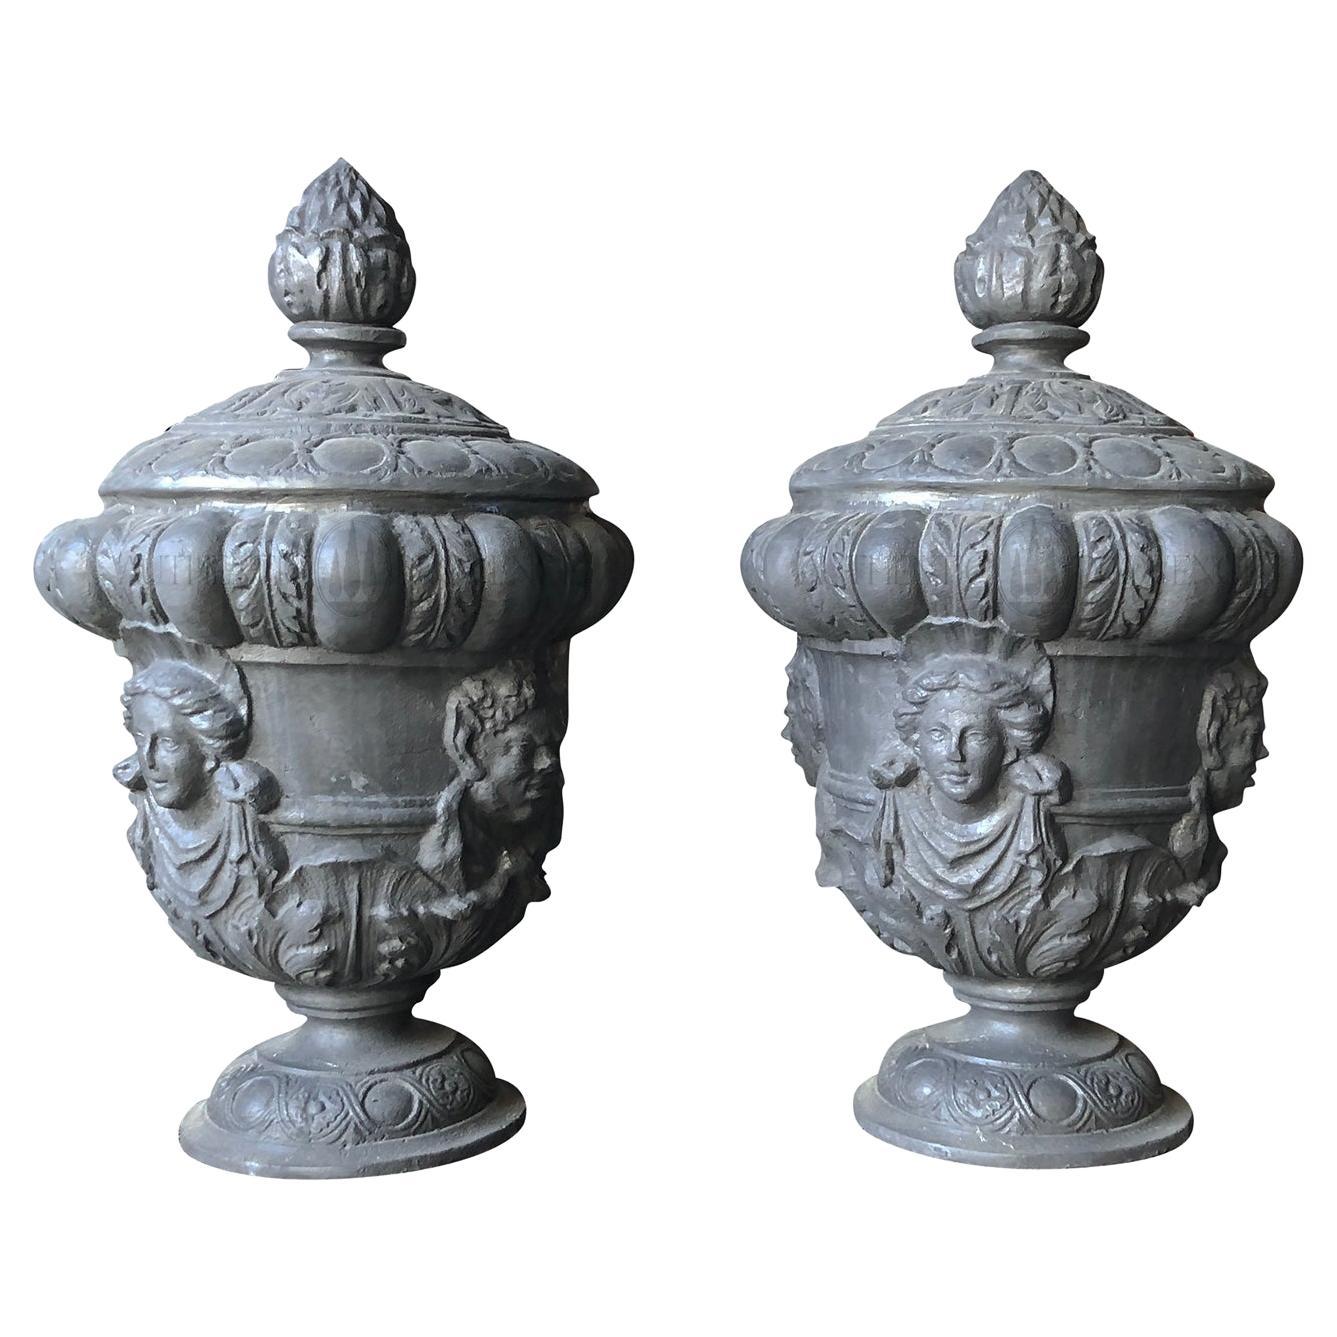 20th Century Grey English Pair of Lead Queen Anne Finials, Vintage Garden Urns For Sale